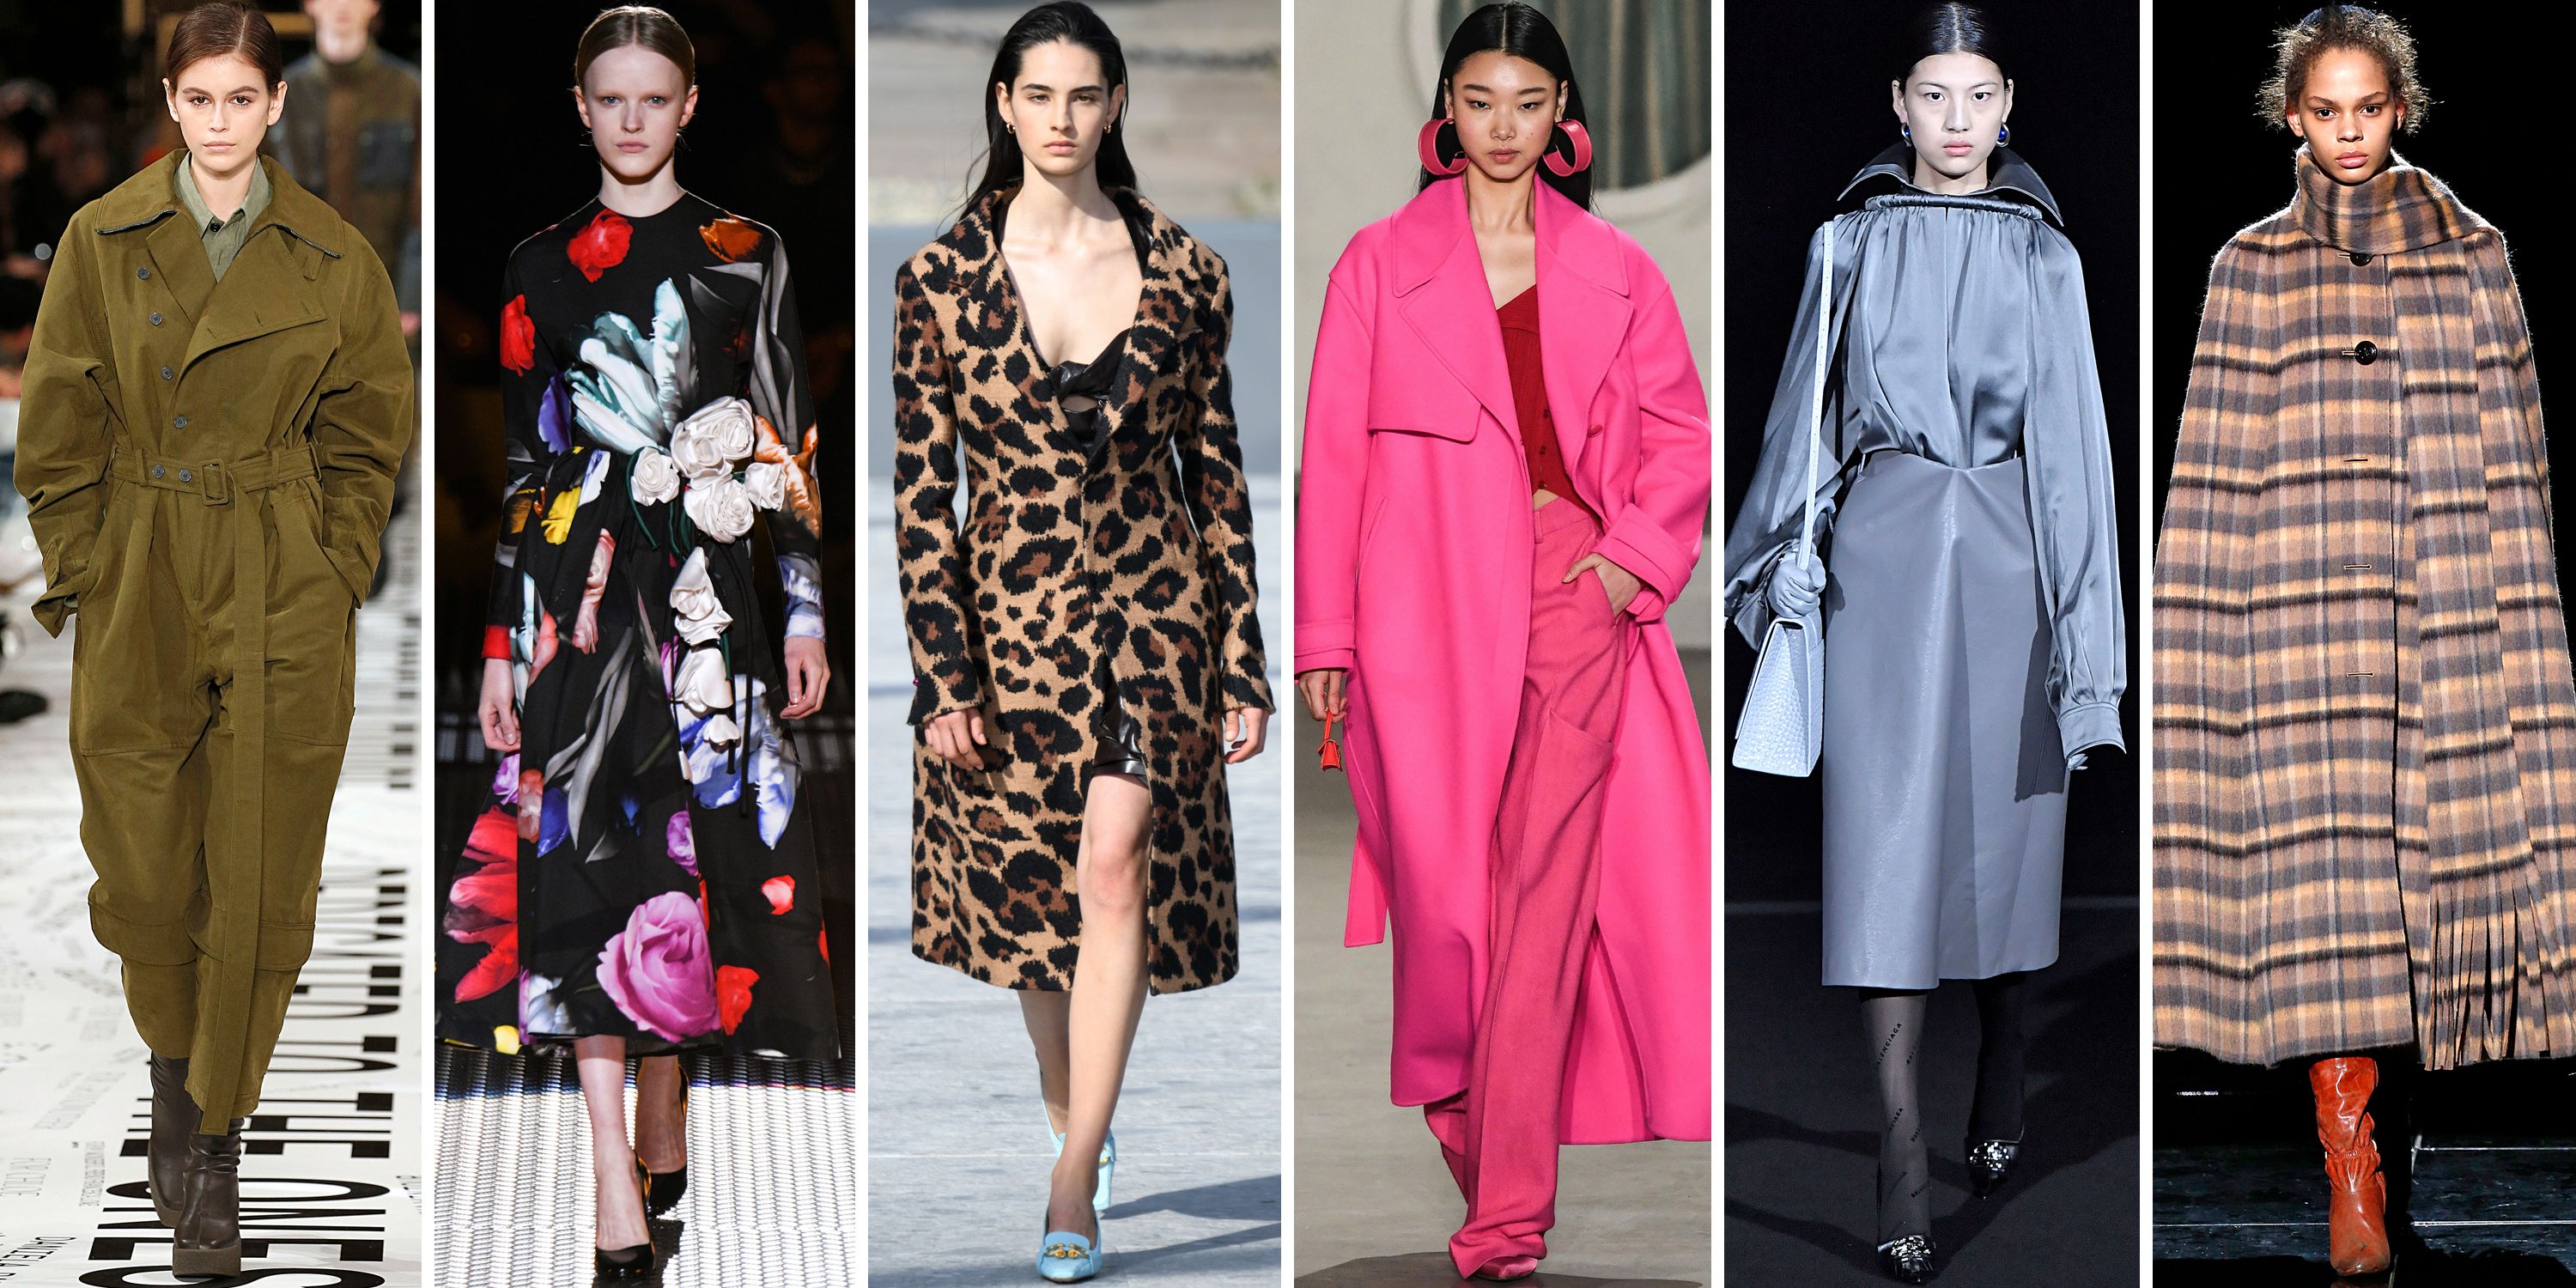 10 Fall Fashion Trends for 2019- Runway-Inspired Autumn Trends for Women